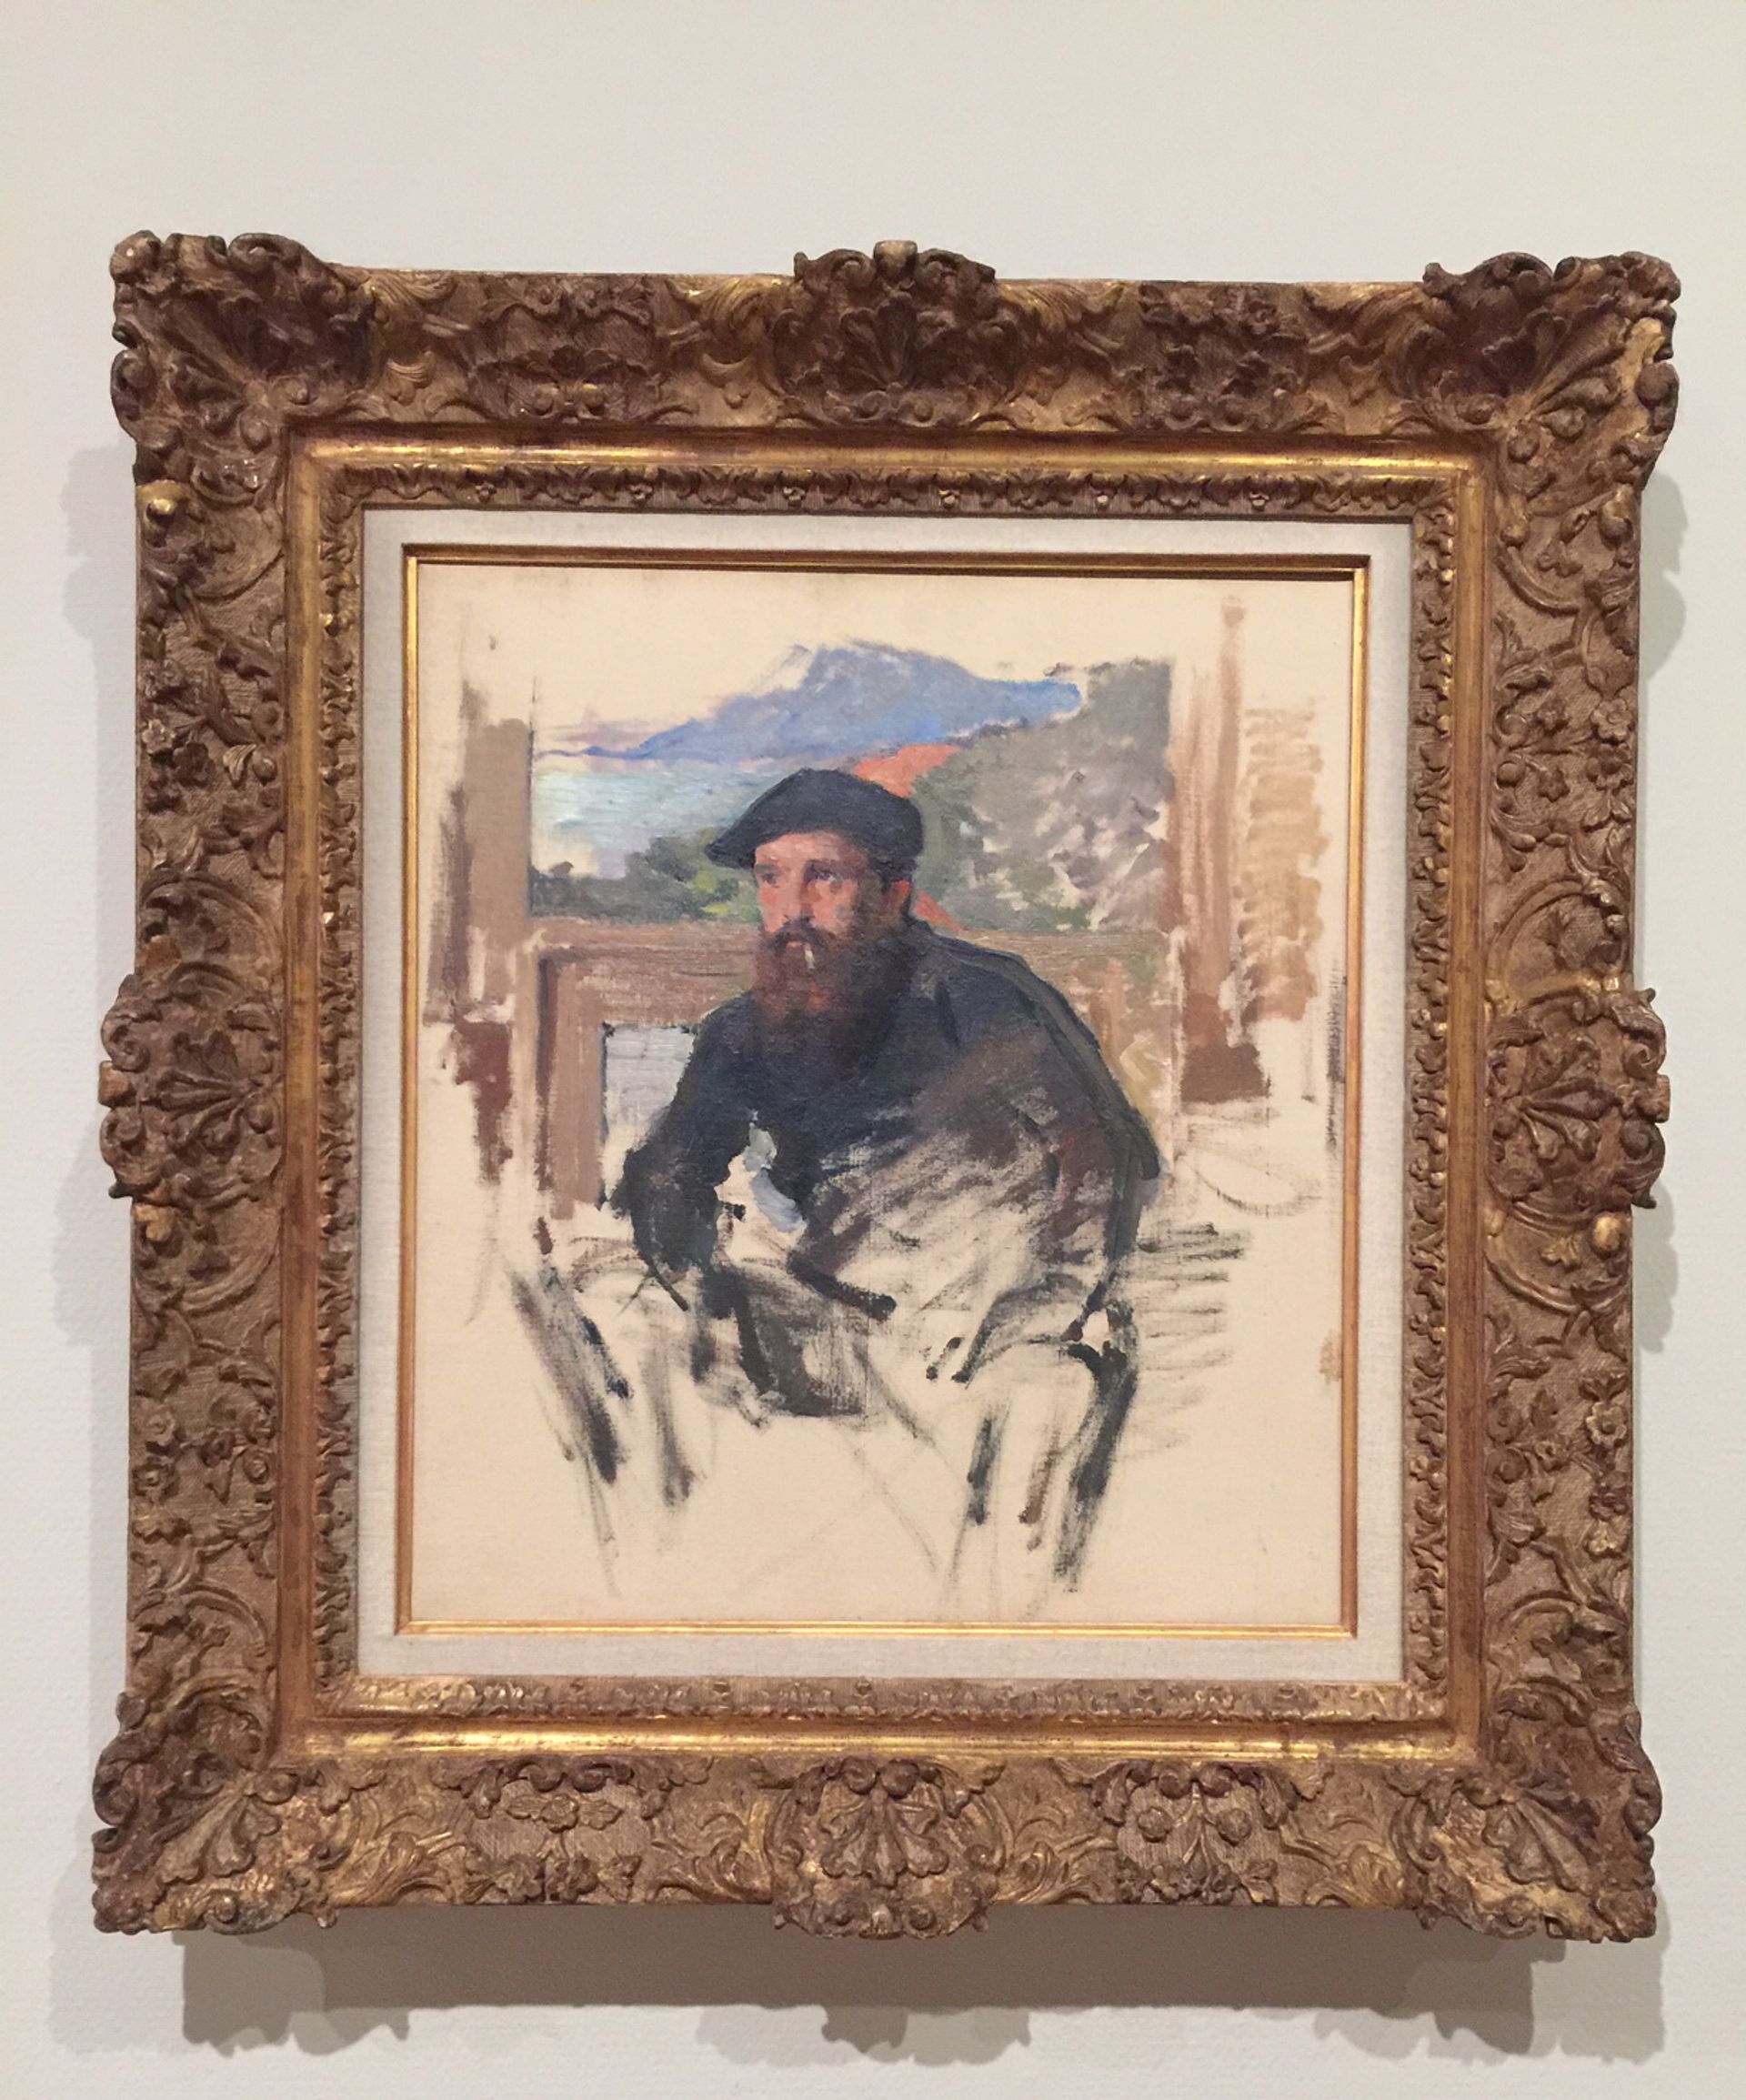 Charles Giron’s Portrait of Monet (1885) © Musée Marmottan Monet, Paris (photographed by Martin Bailey at the Van Gogh Museum, Amsterdam)